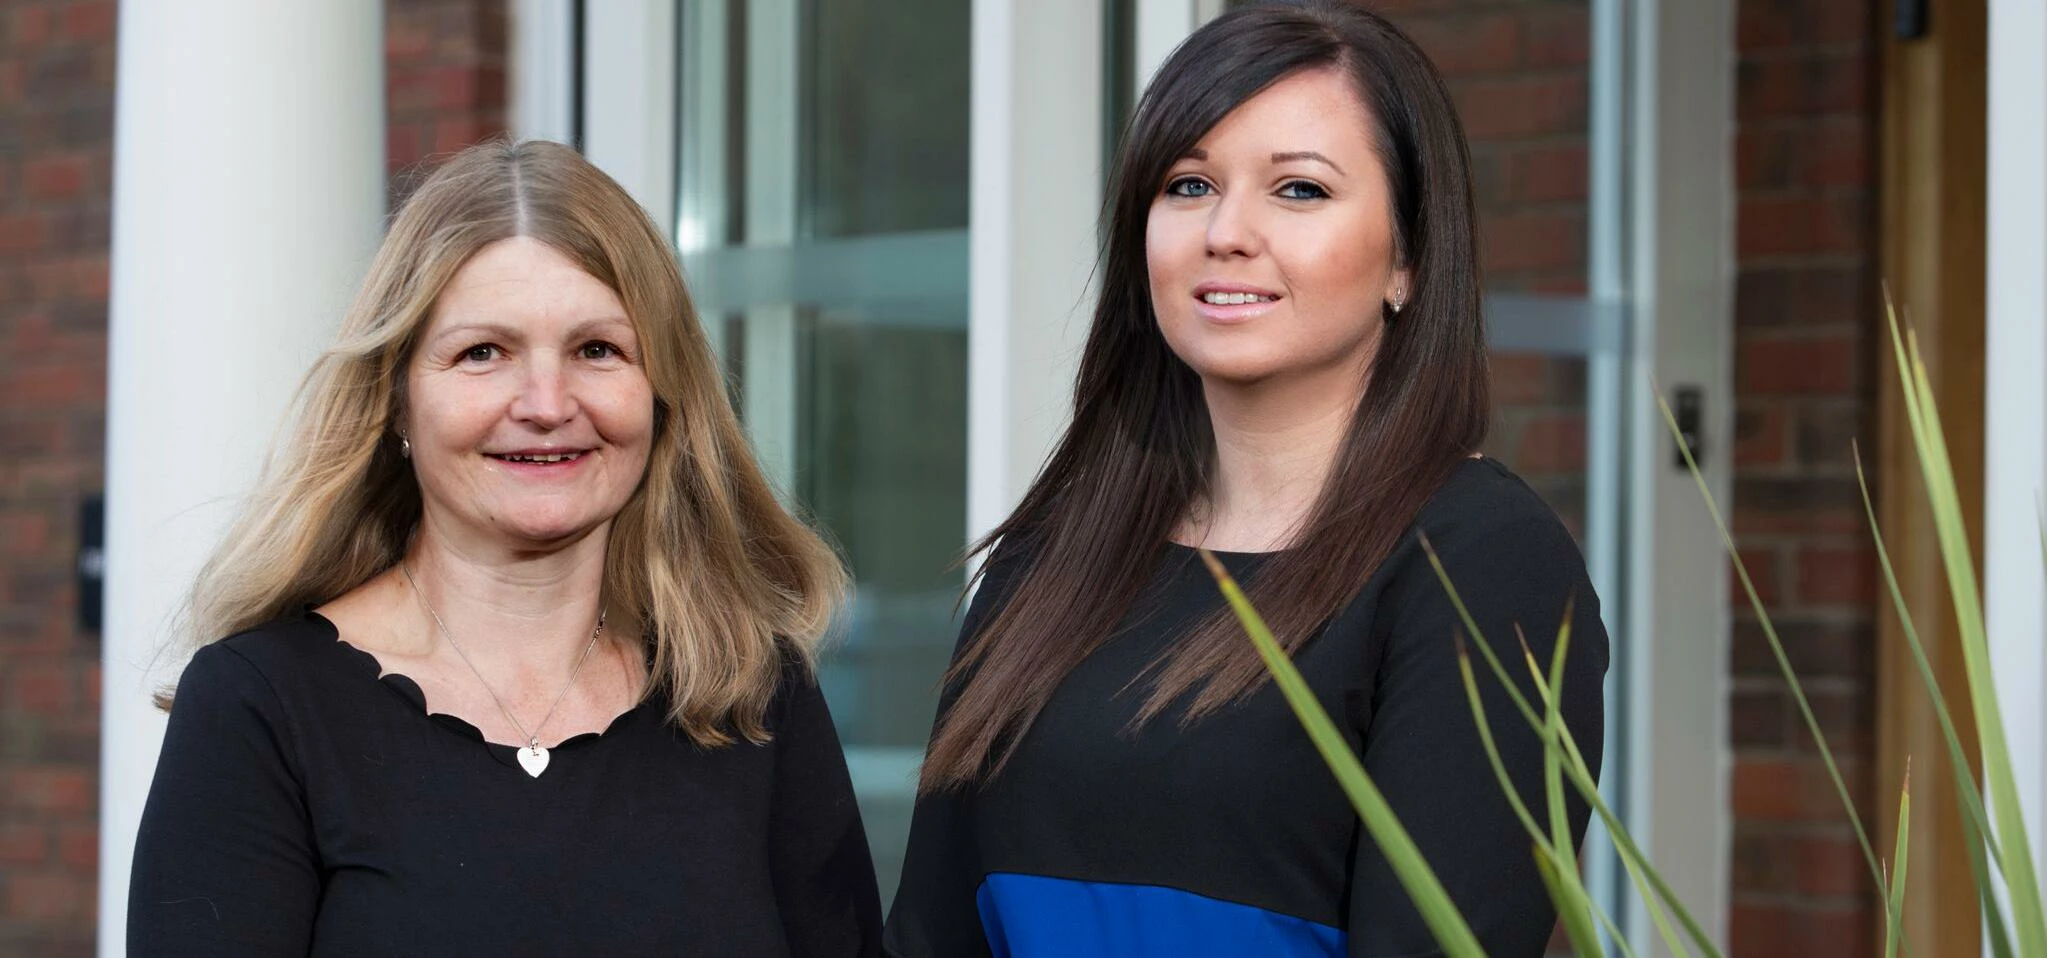 New year promotions for law firm Lodders’ Samantha Haines (left) and Hollie Coyne.